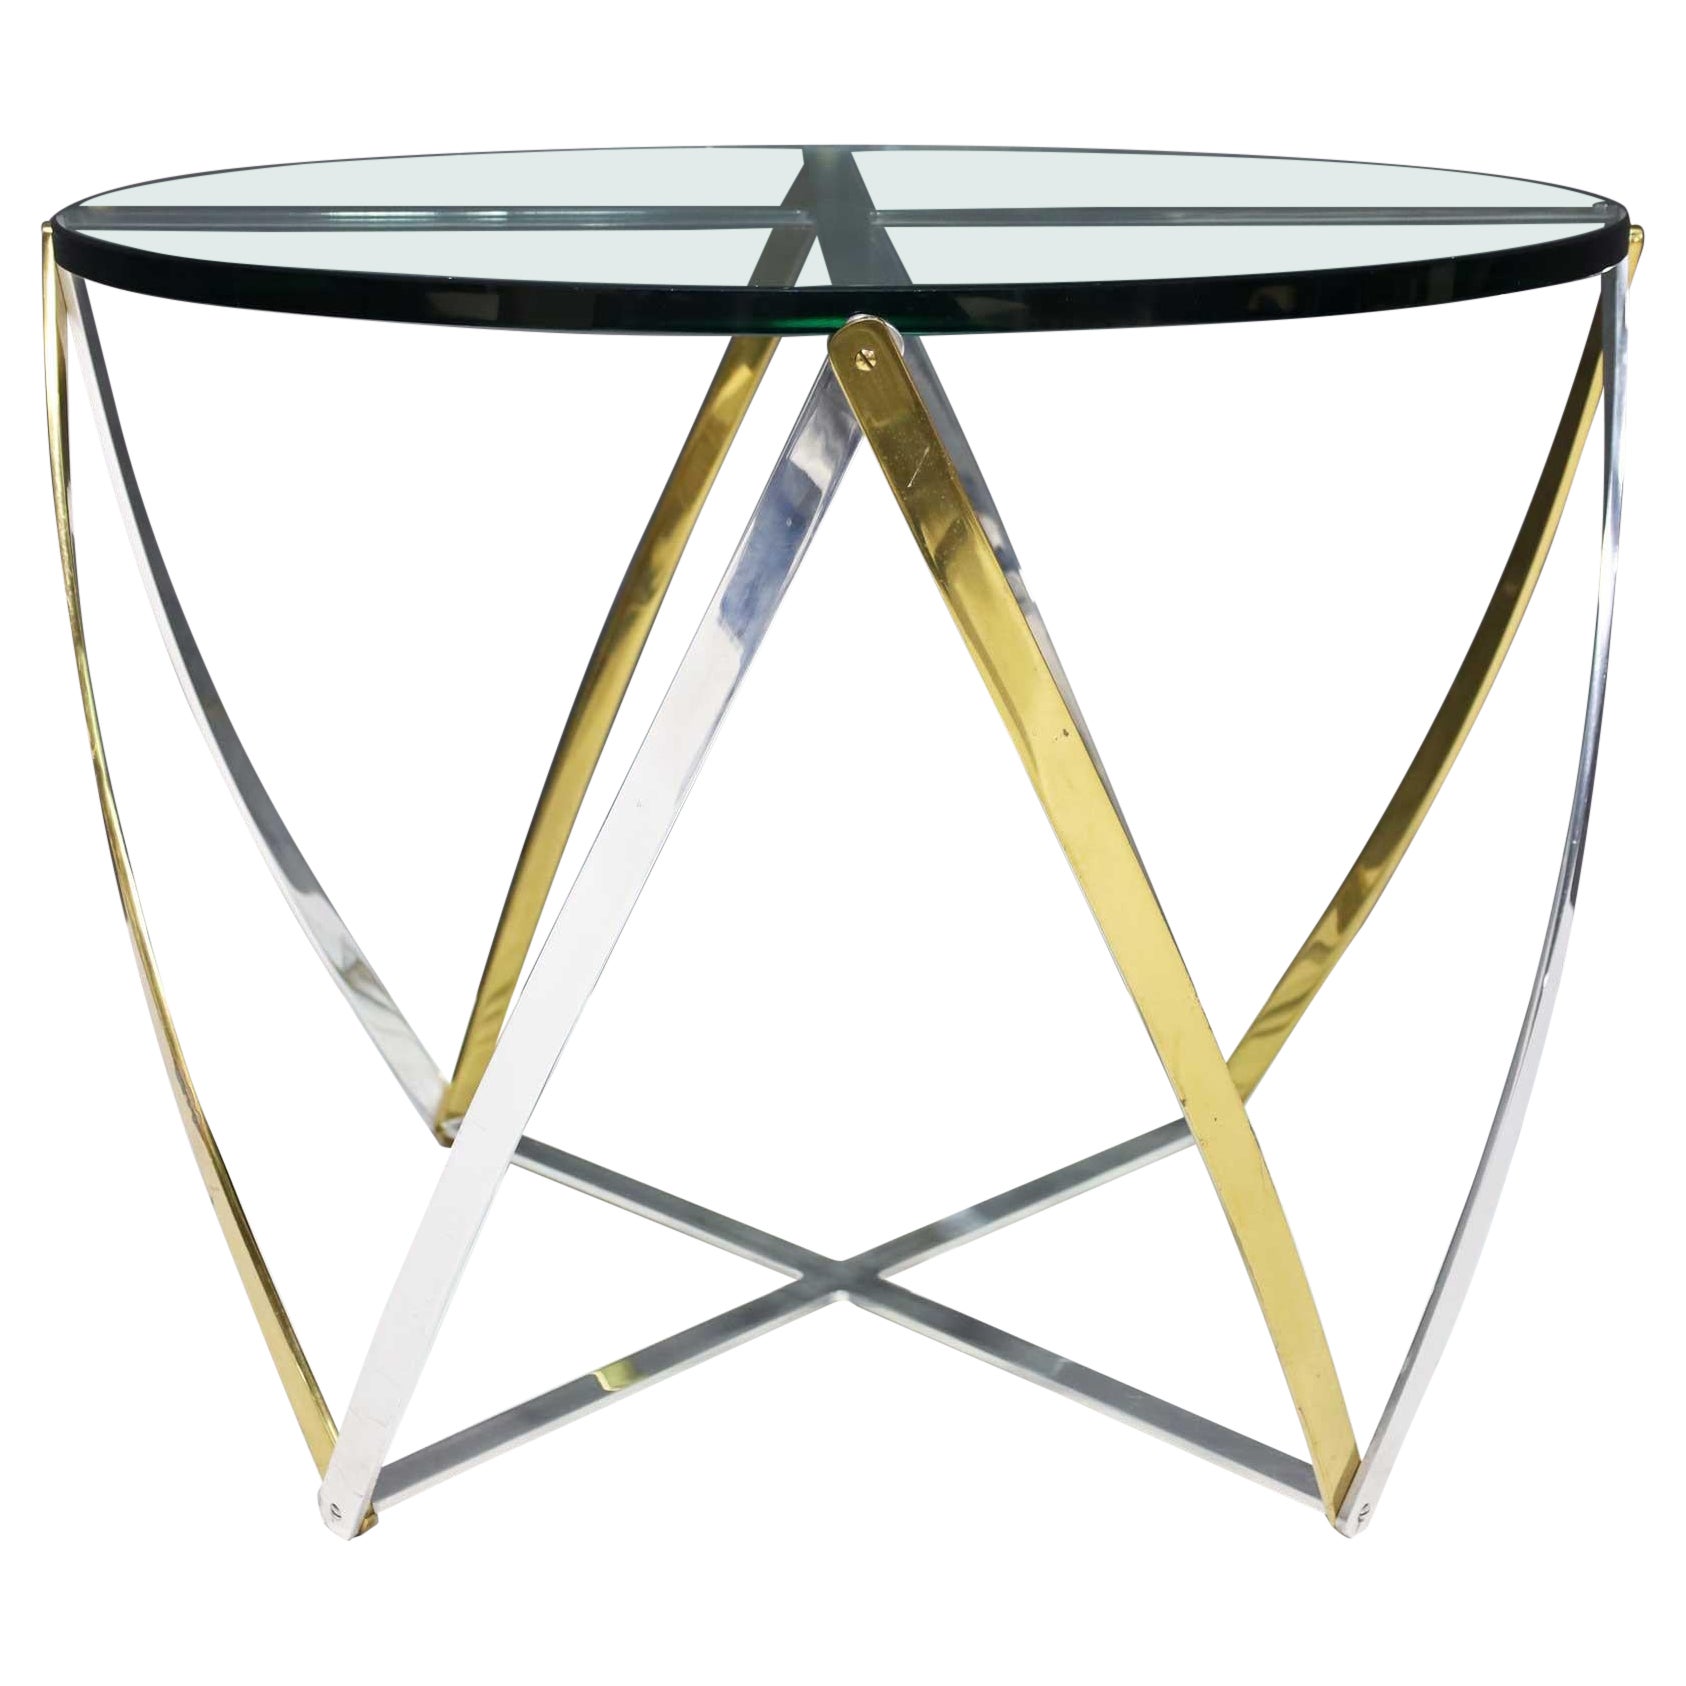 Large John Vesey Brass and Brushed Aluminum Table 1970s, Glass Top For Sale